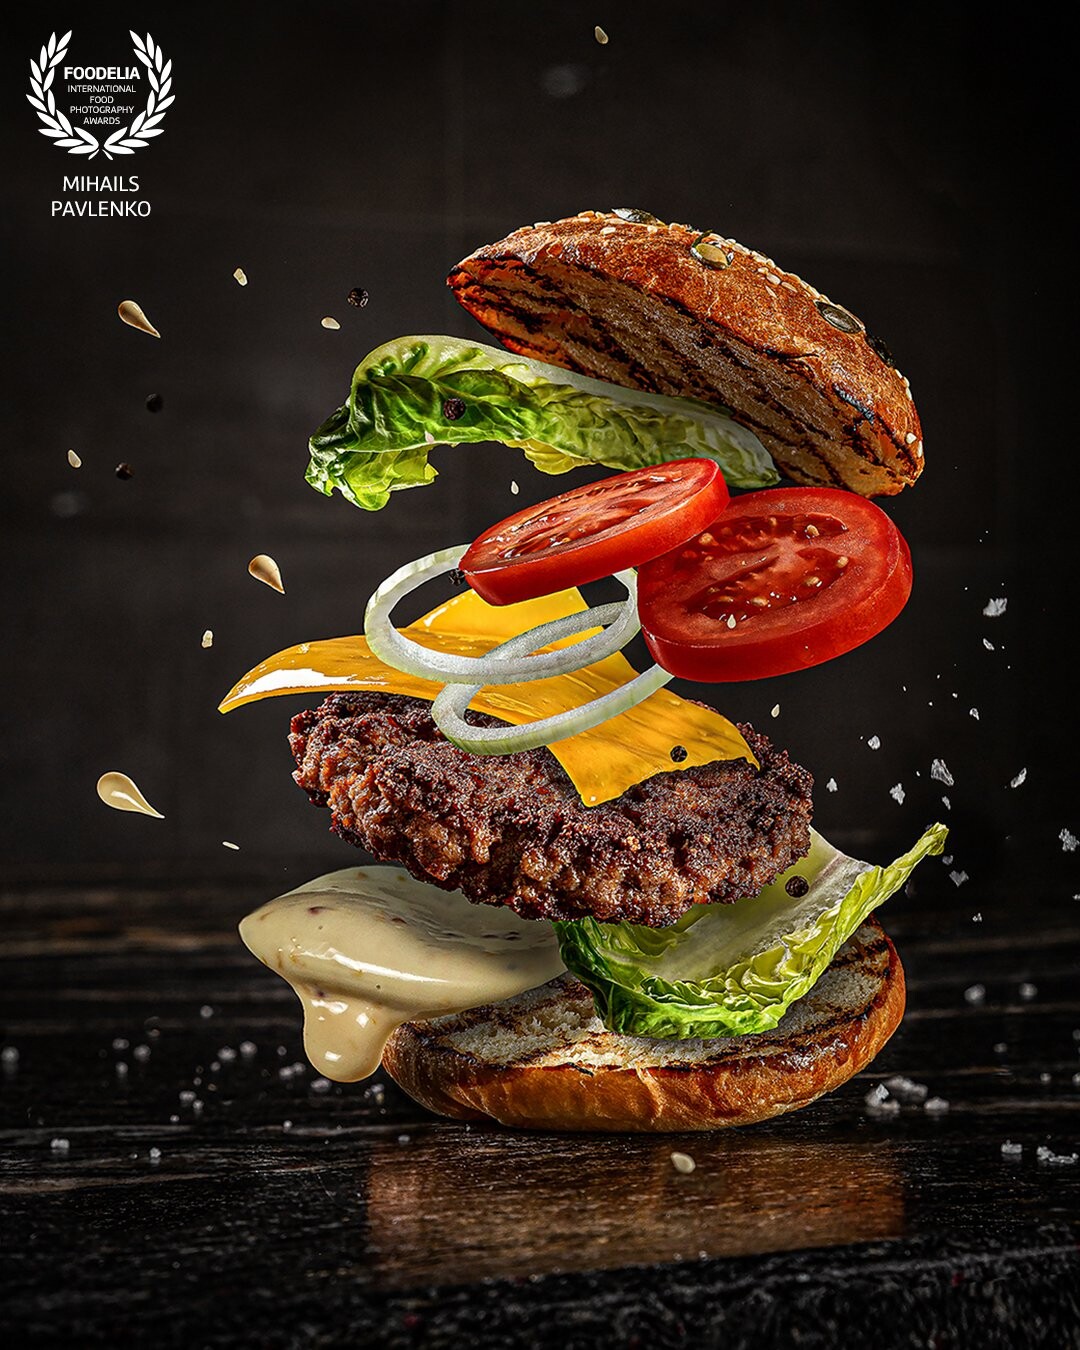 Fresh and juicy indgredients in beef burger. Photo shoot of the menu in Hilton hotel @hiltongardeninnriga in Riga specially for Beef Room restaurant @beef.room.riga